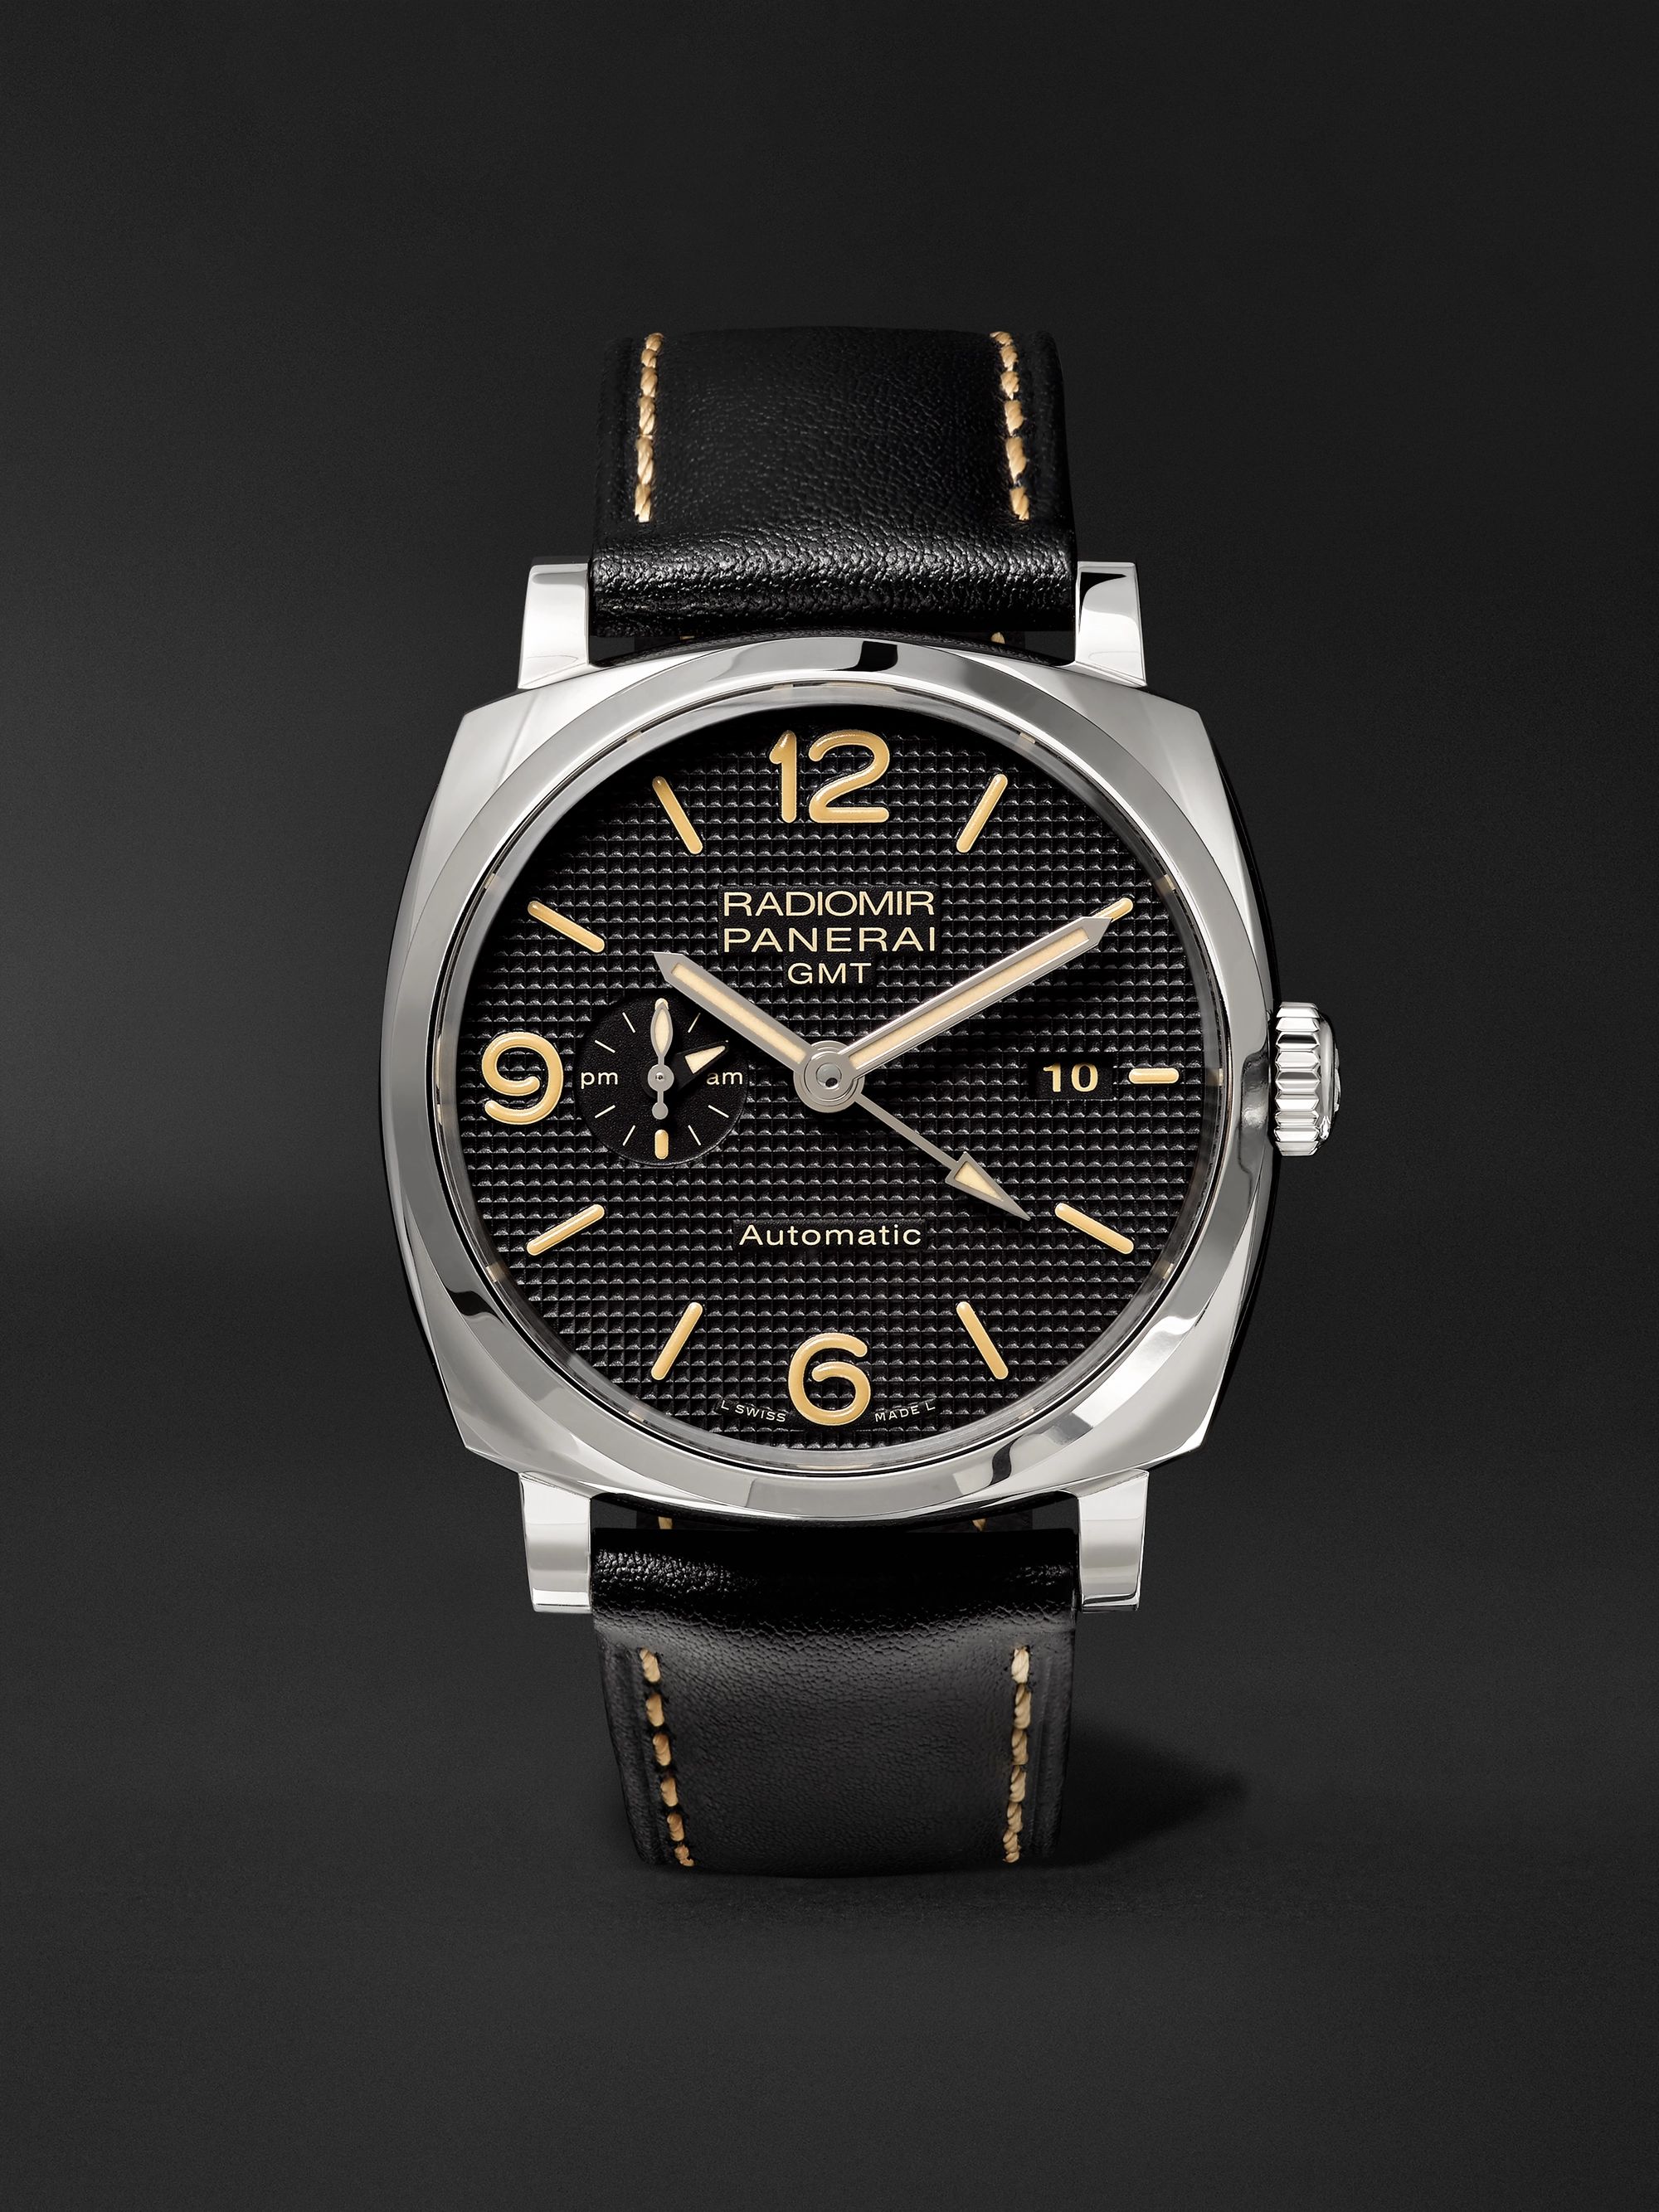 PANERAI Radiomir 1940 3 Days GMT Automatic Acciaio 45mm Stainless Steel and Leather Watch, Ref. No. PAM00627